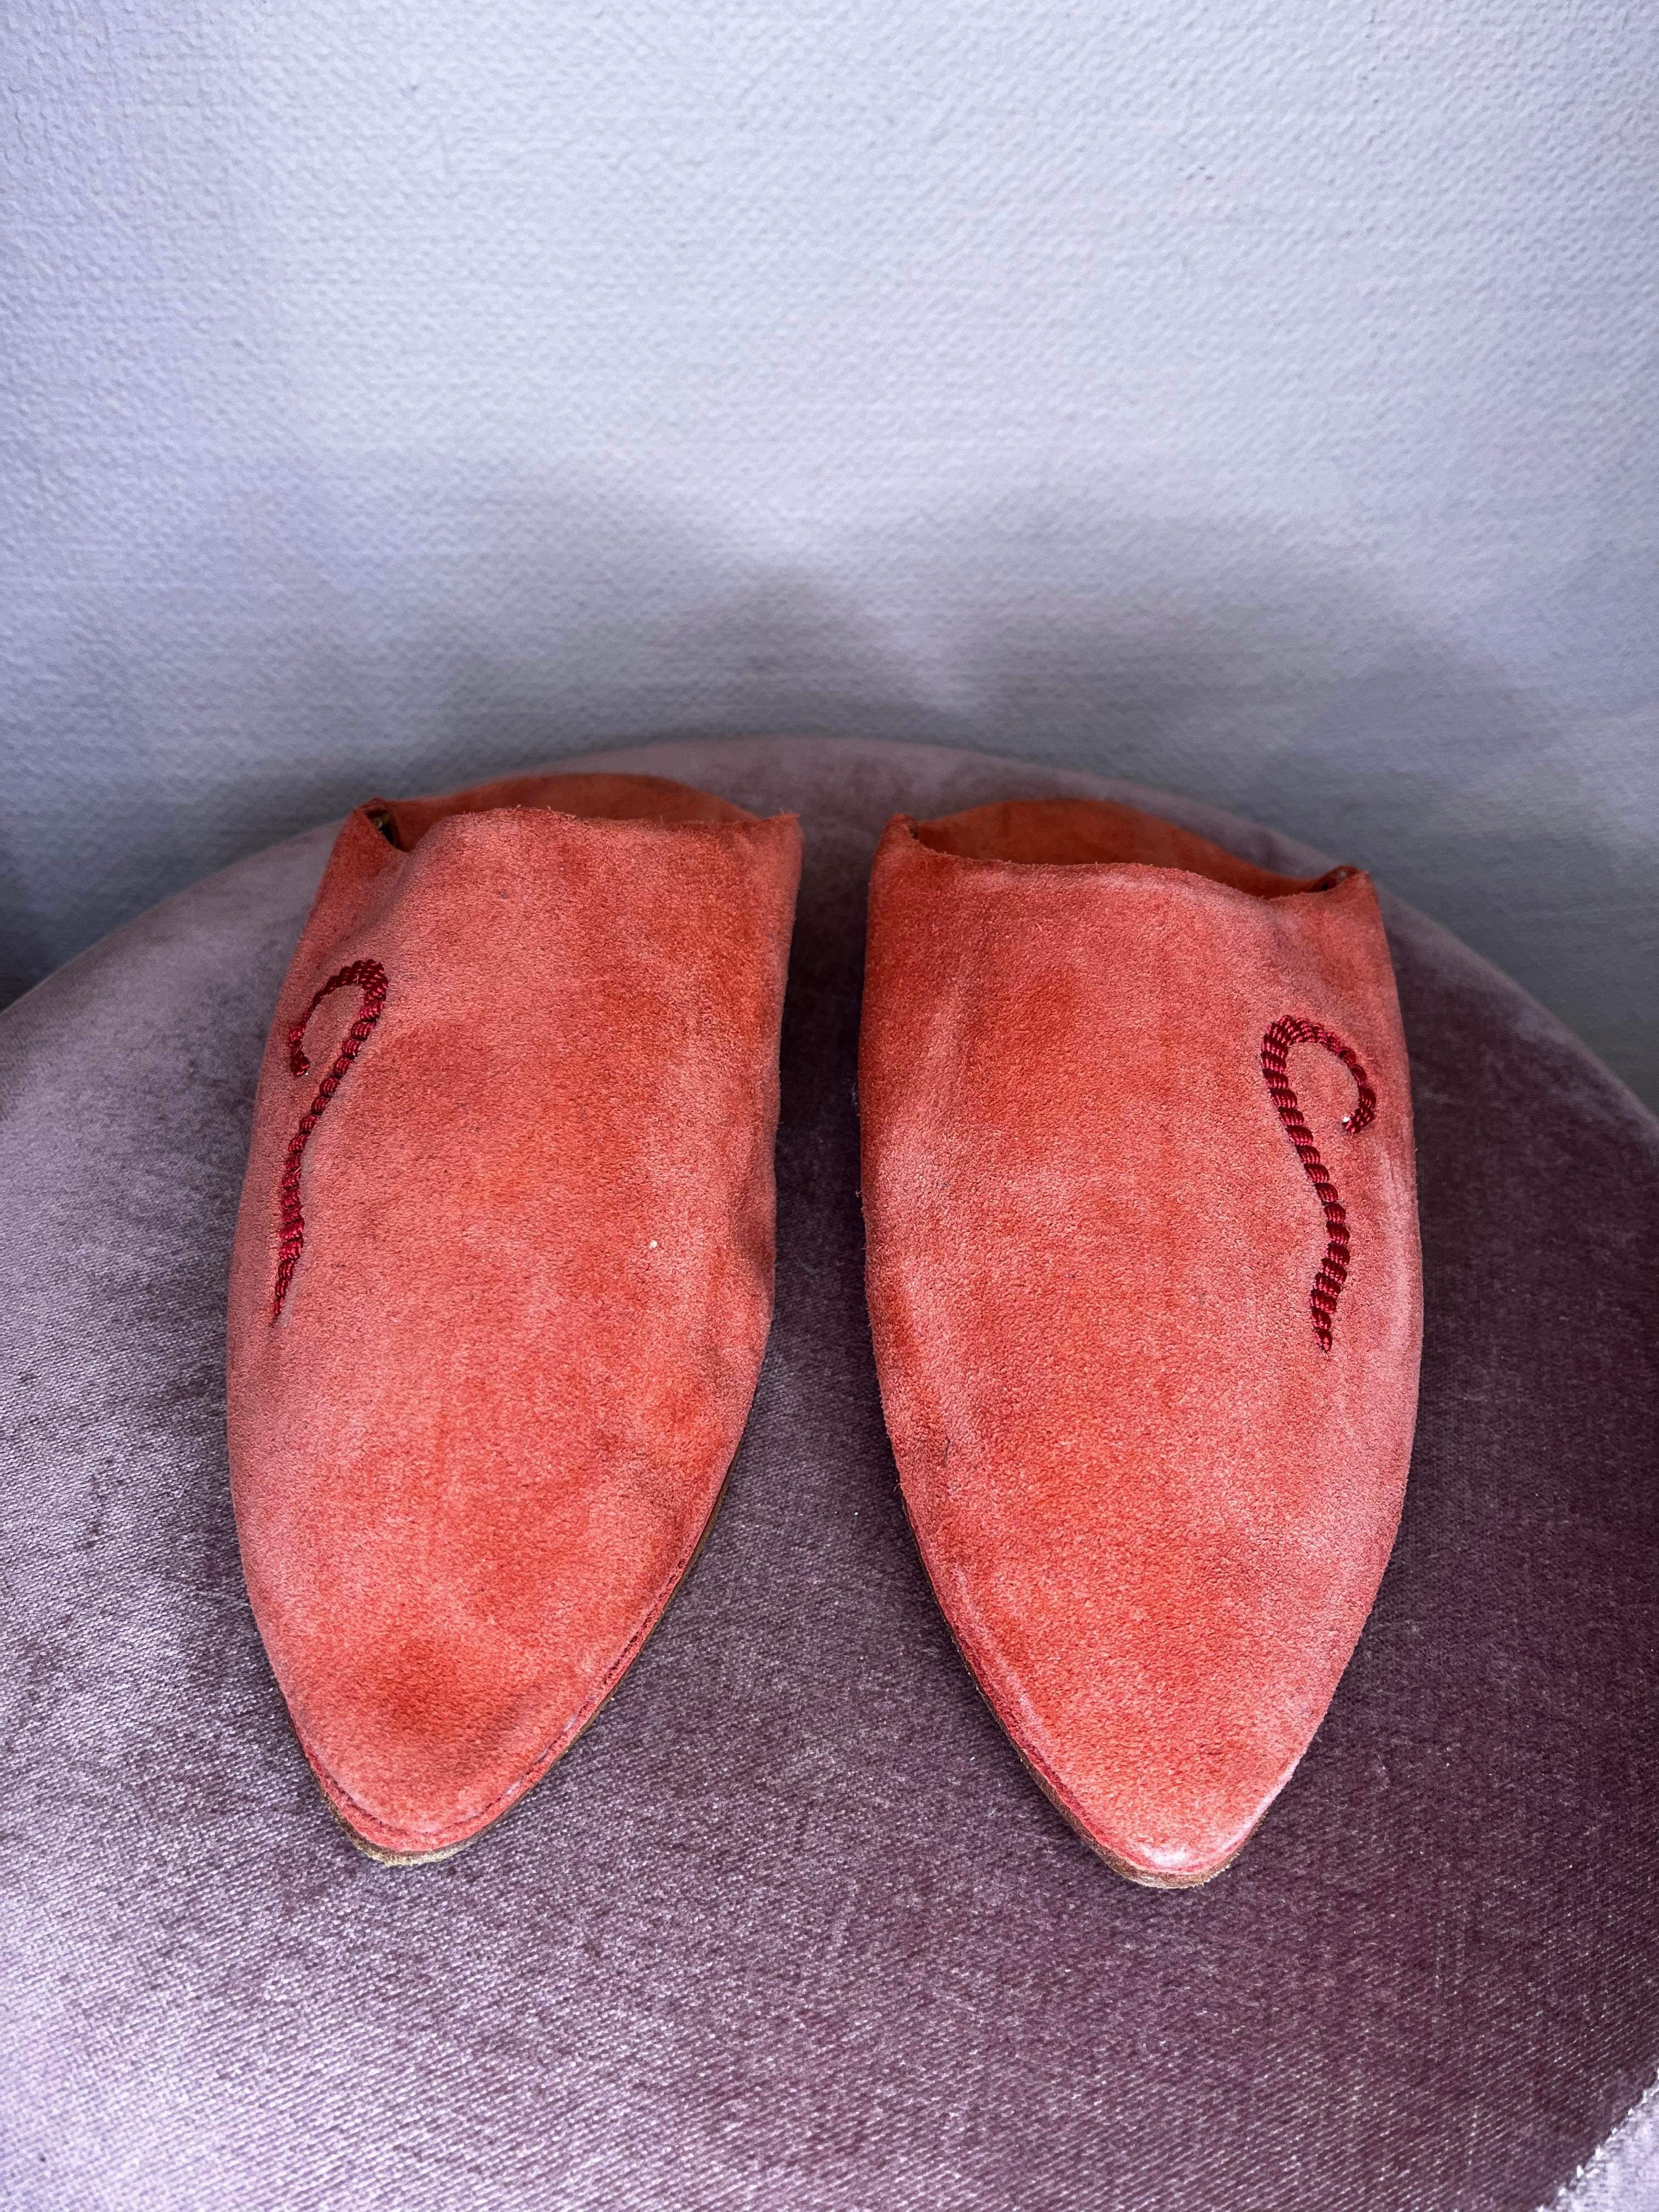 No brand - Slippers - Size: 37